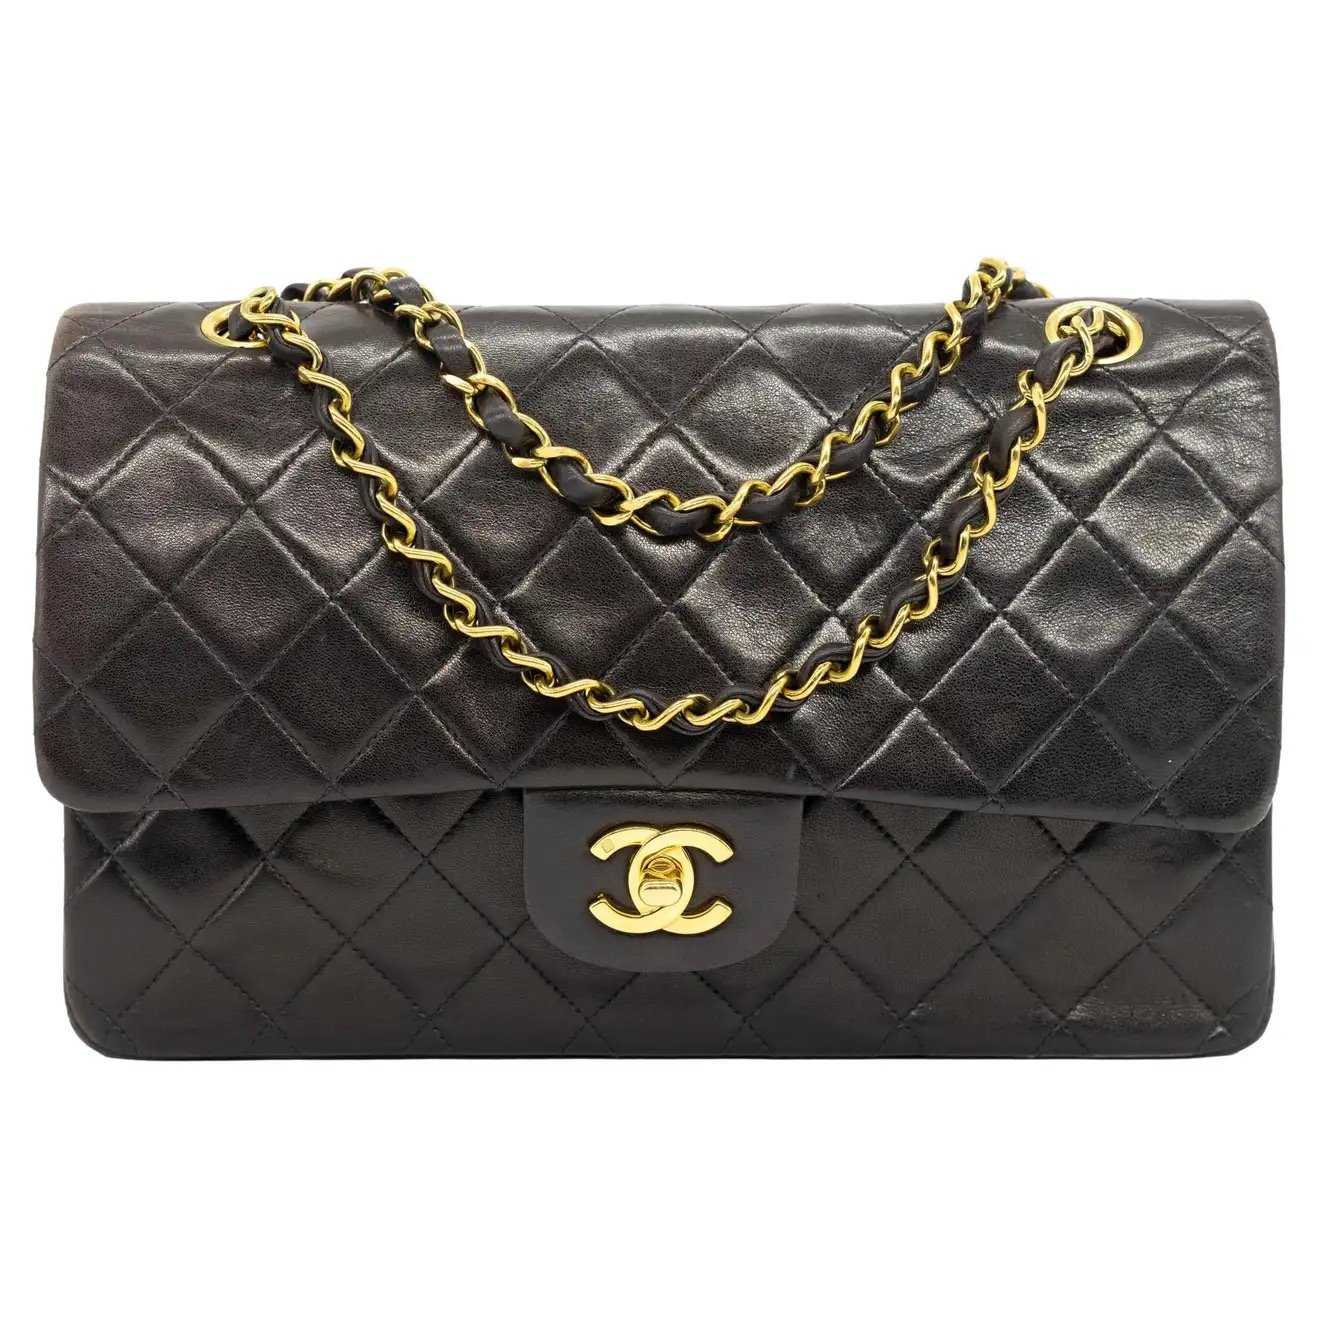 red chanel crossbody purse leather